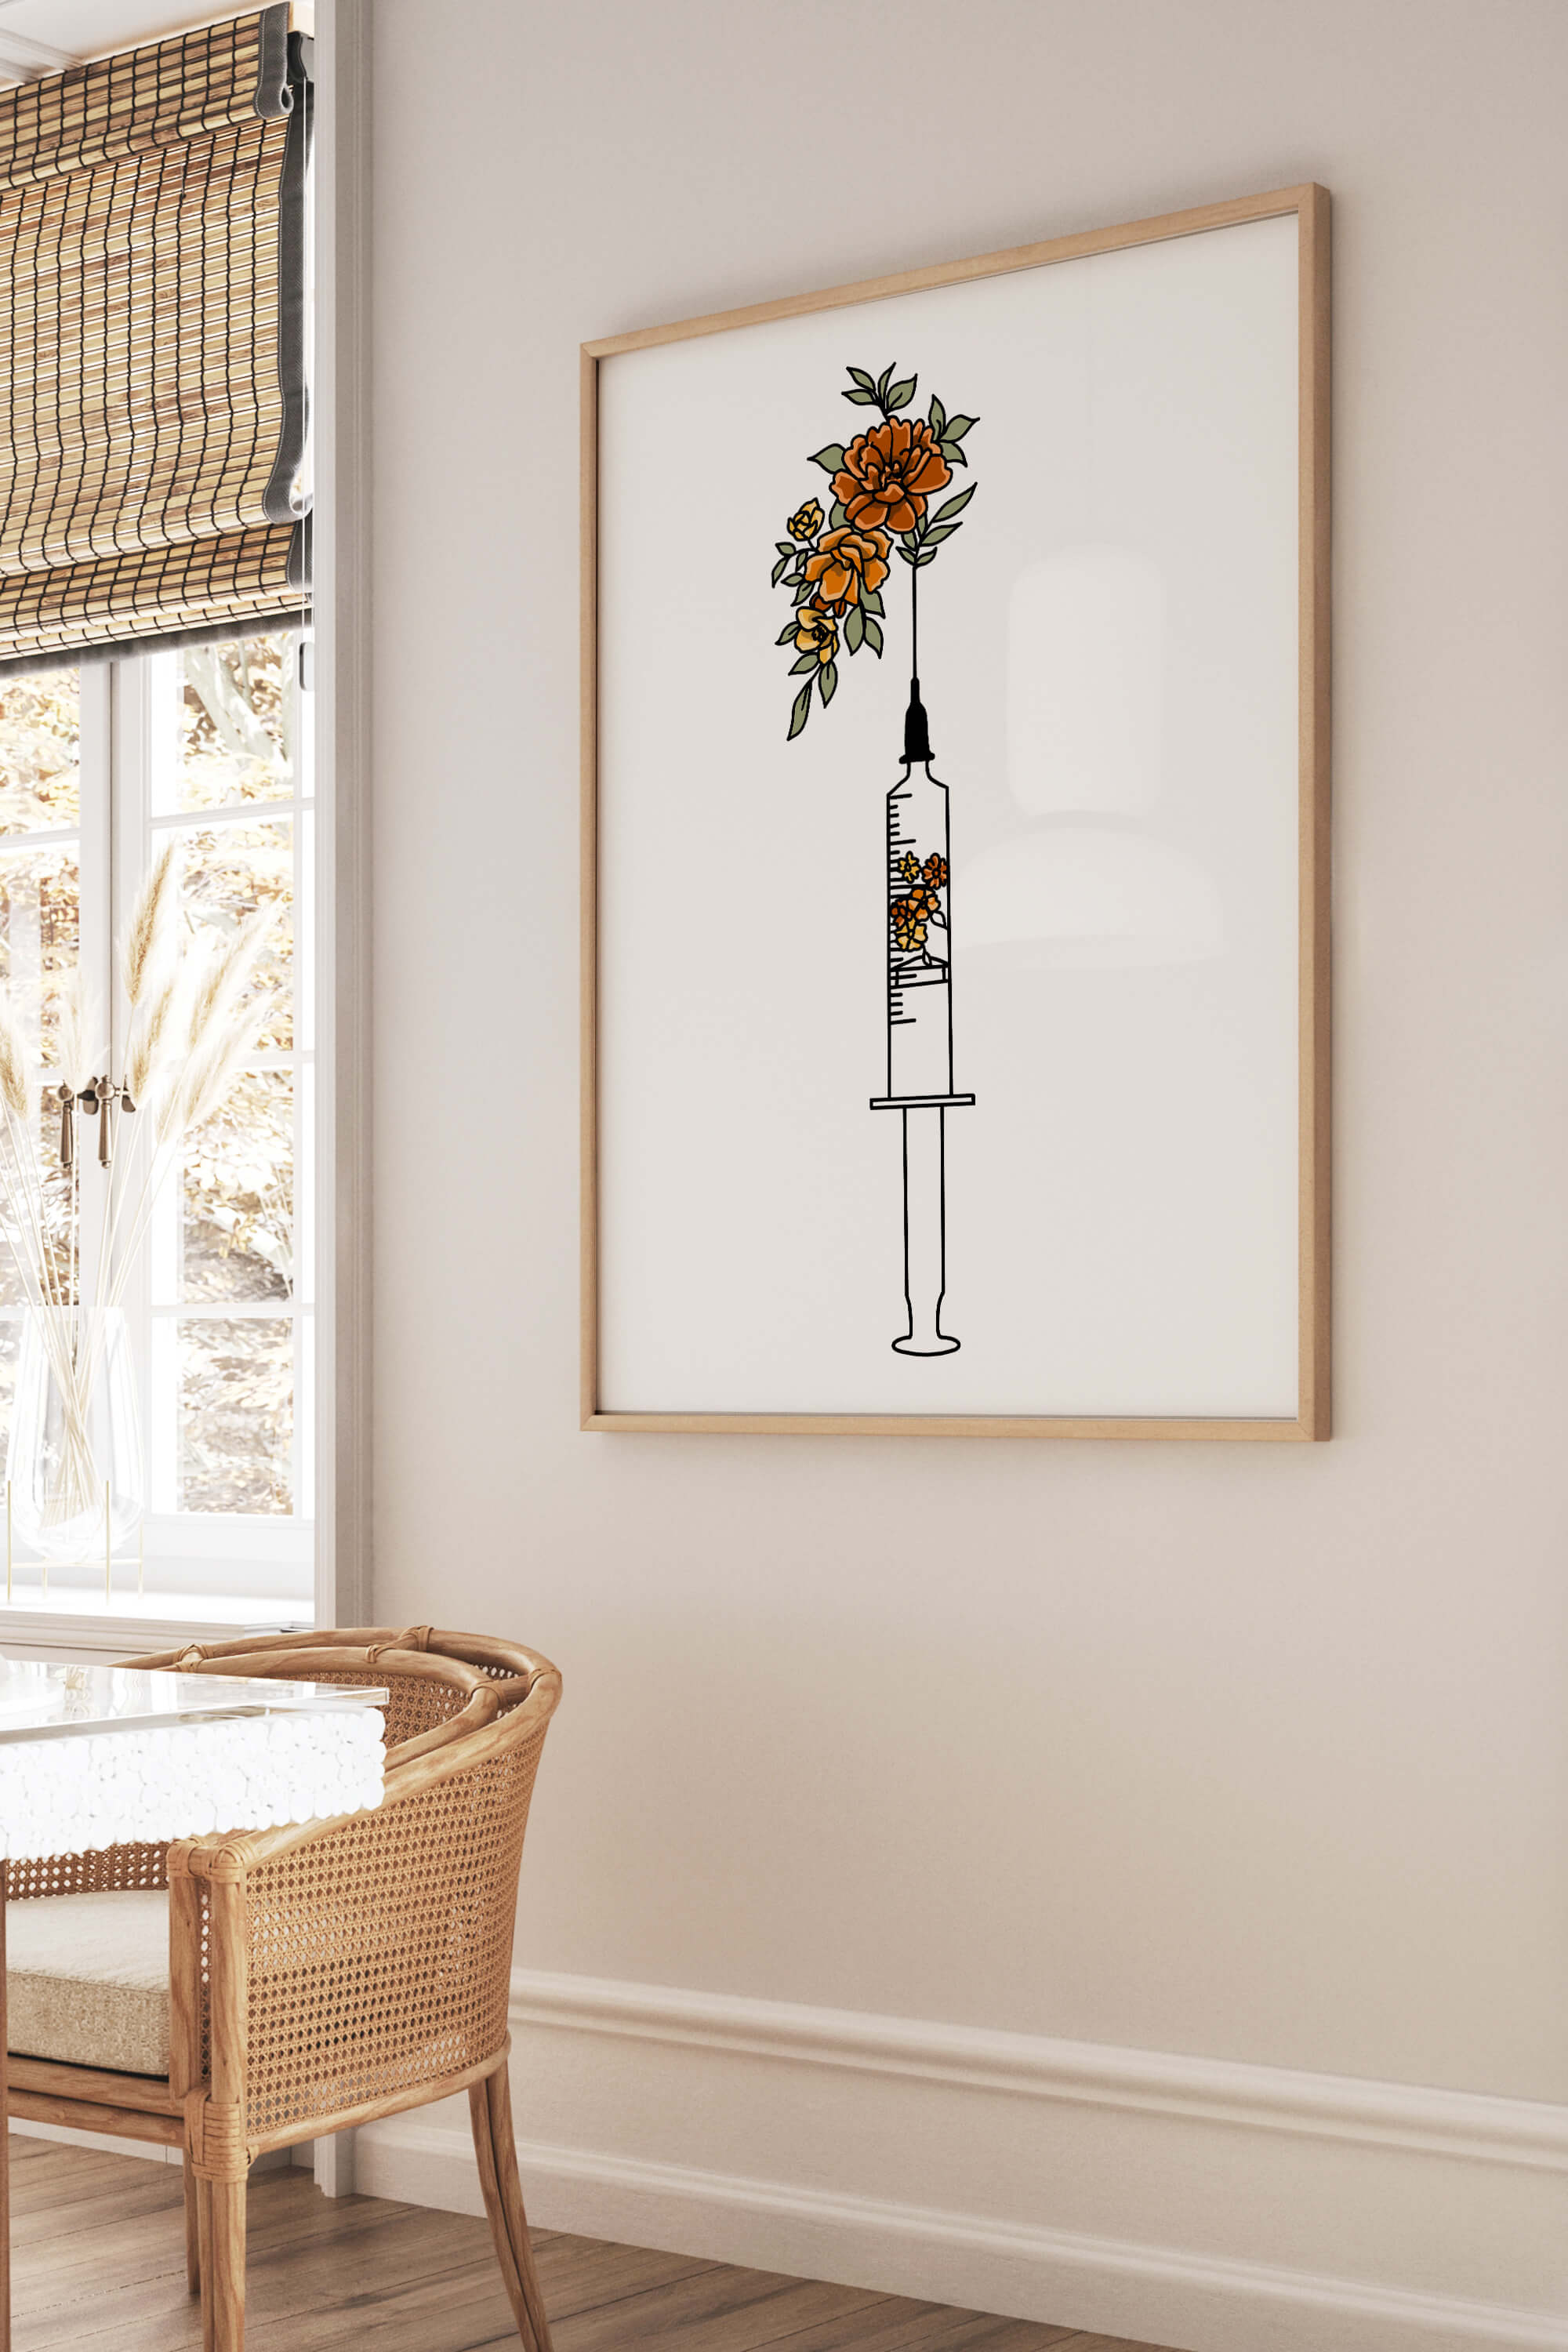 Botanical Syringe Wall Art depicting a syringe with flower details, ideal for healthcare settings seeking a touch of color and art.